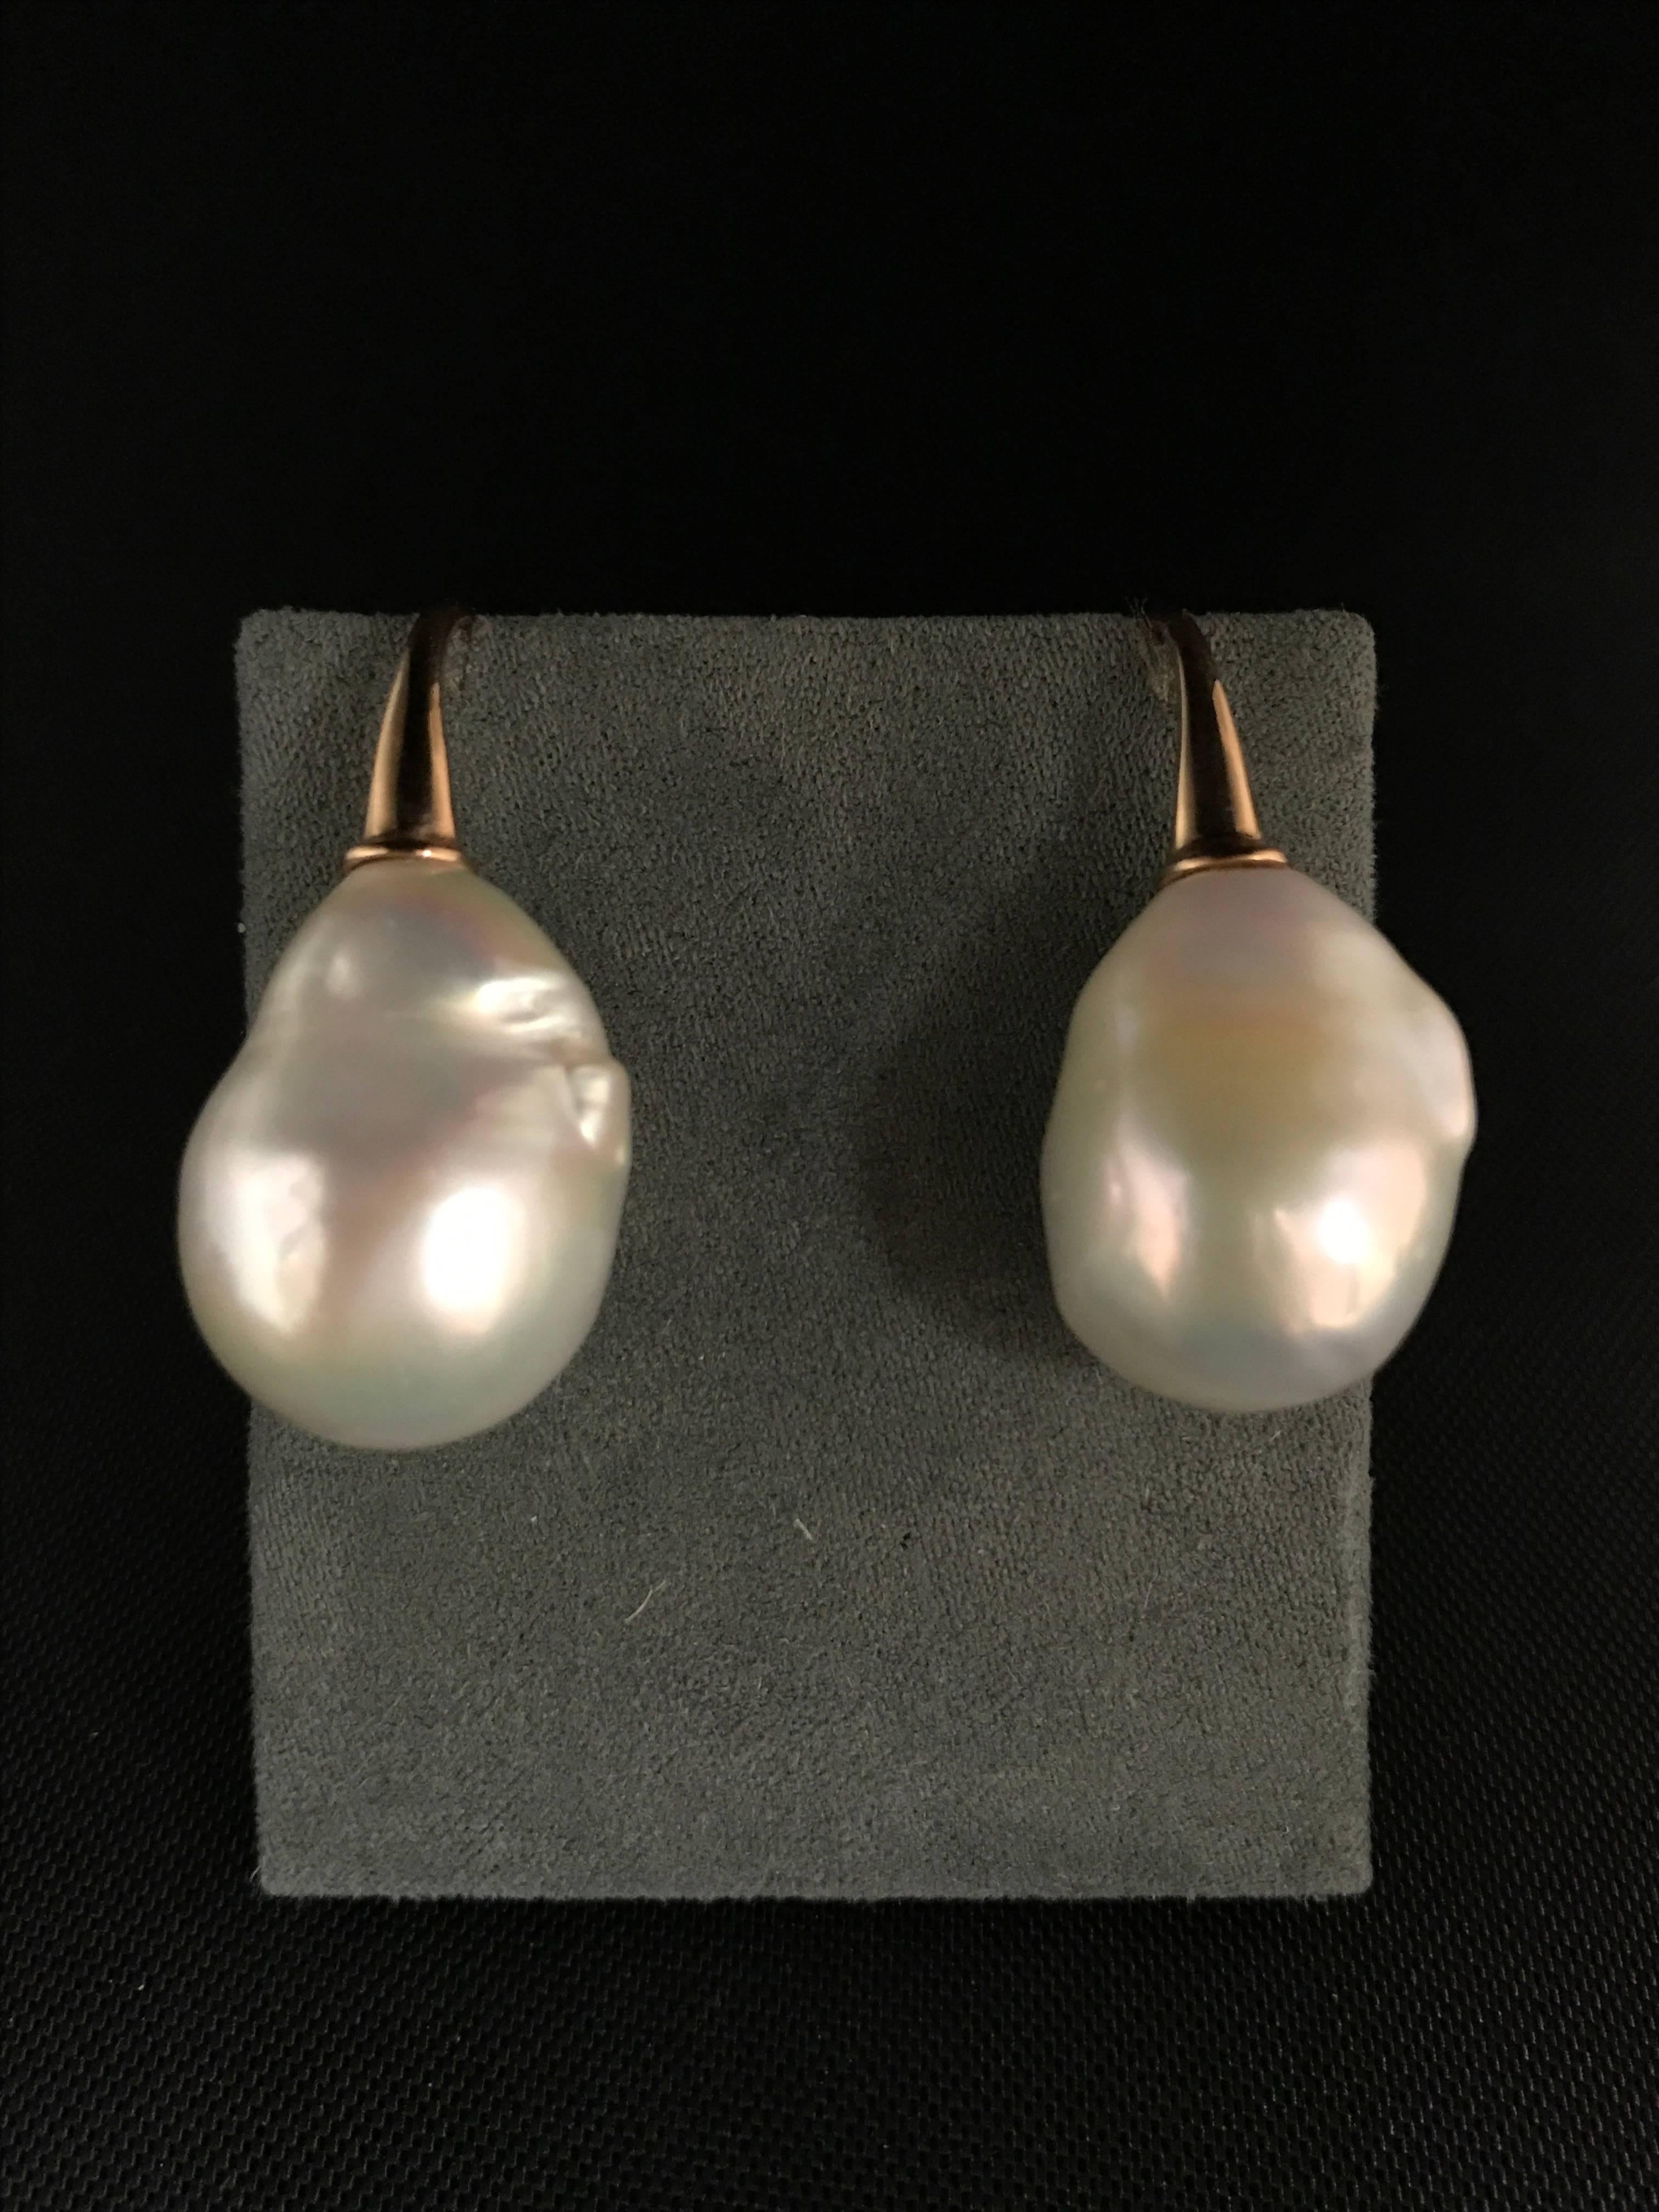 Cultured Pearls and Pink Gold Baroque Earrings
Pink Gold 2,5 gr
Cultured Pearls
Length : 3,2 cm